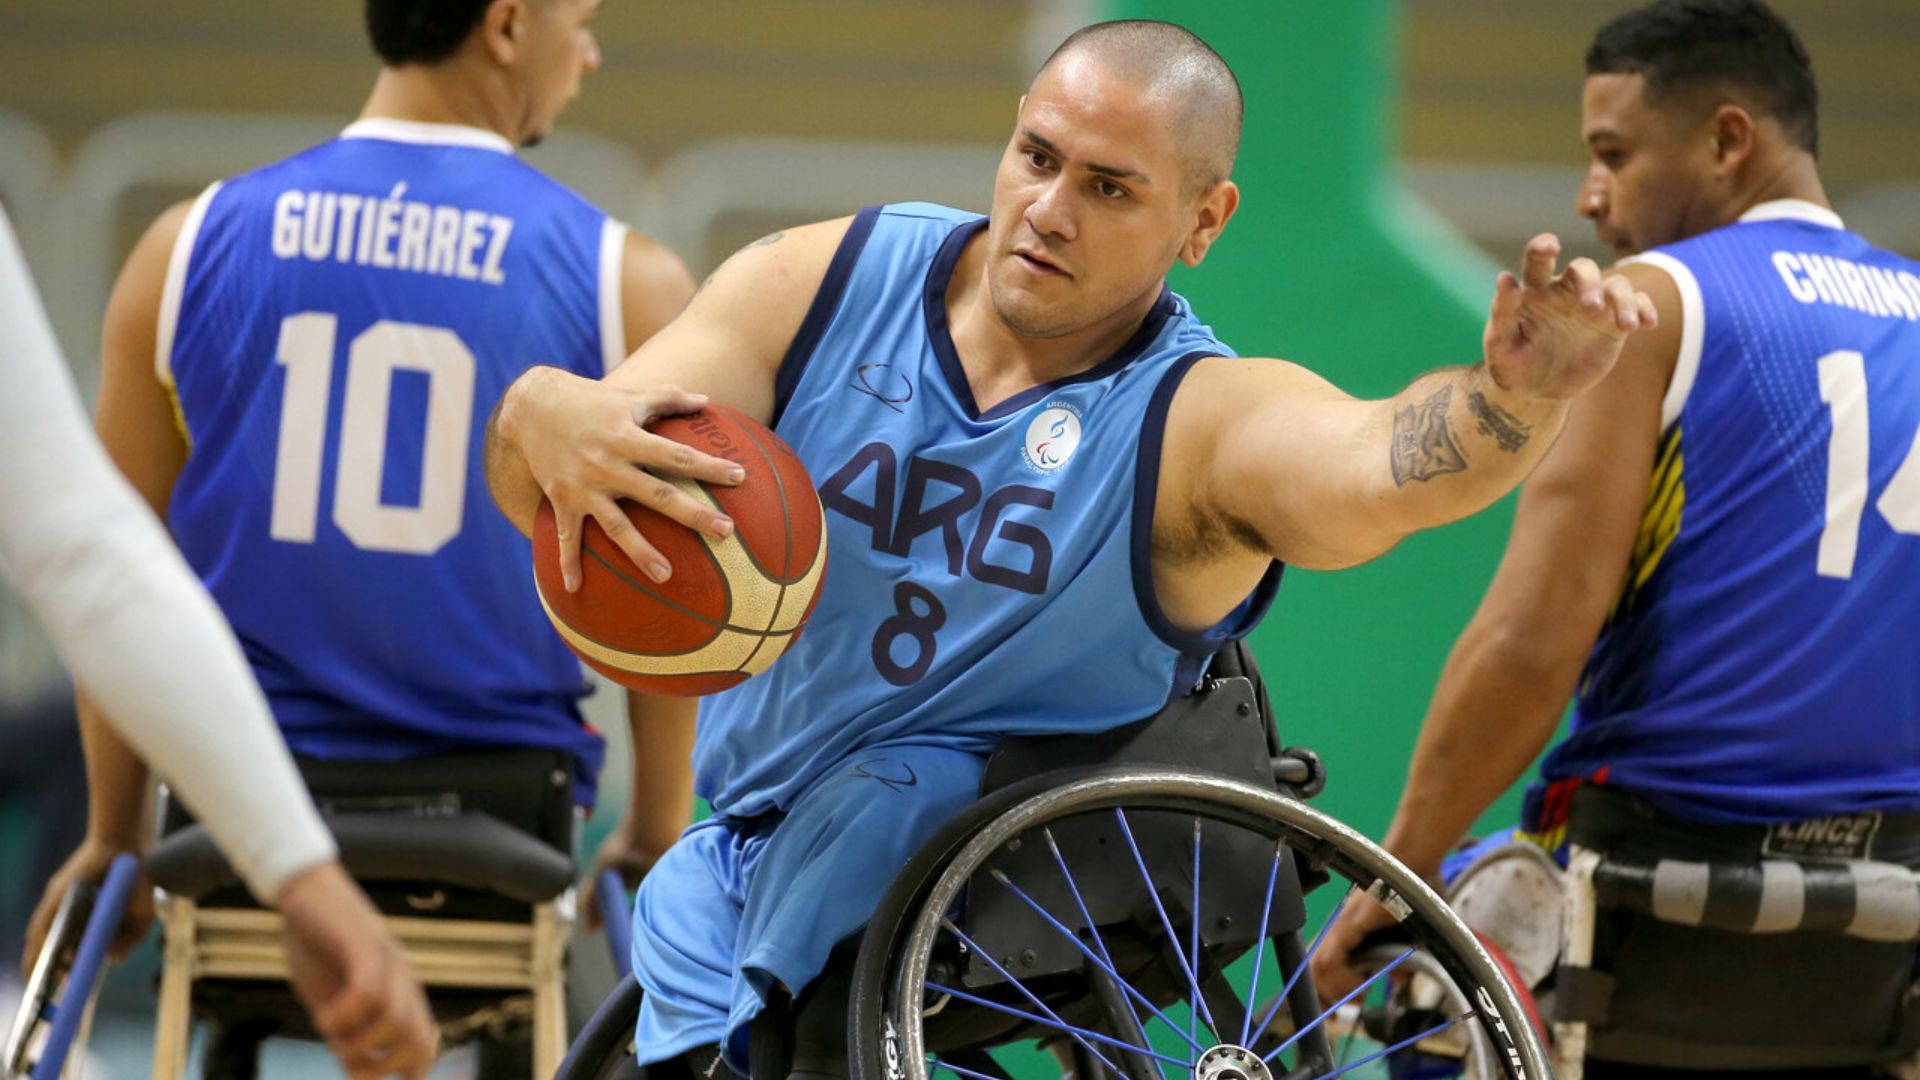 Argentina Opens Wheelchair Basketball with Victory Over Venezuela